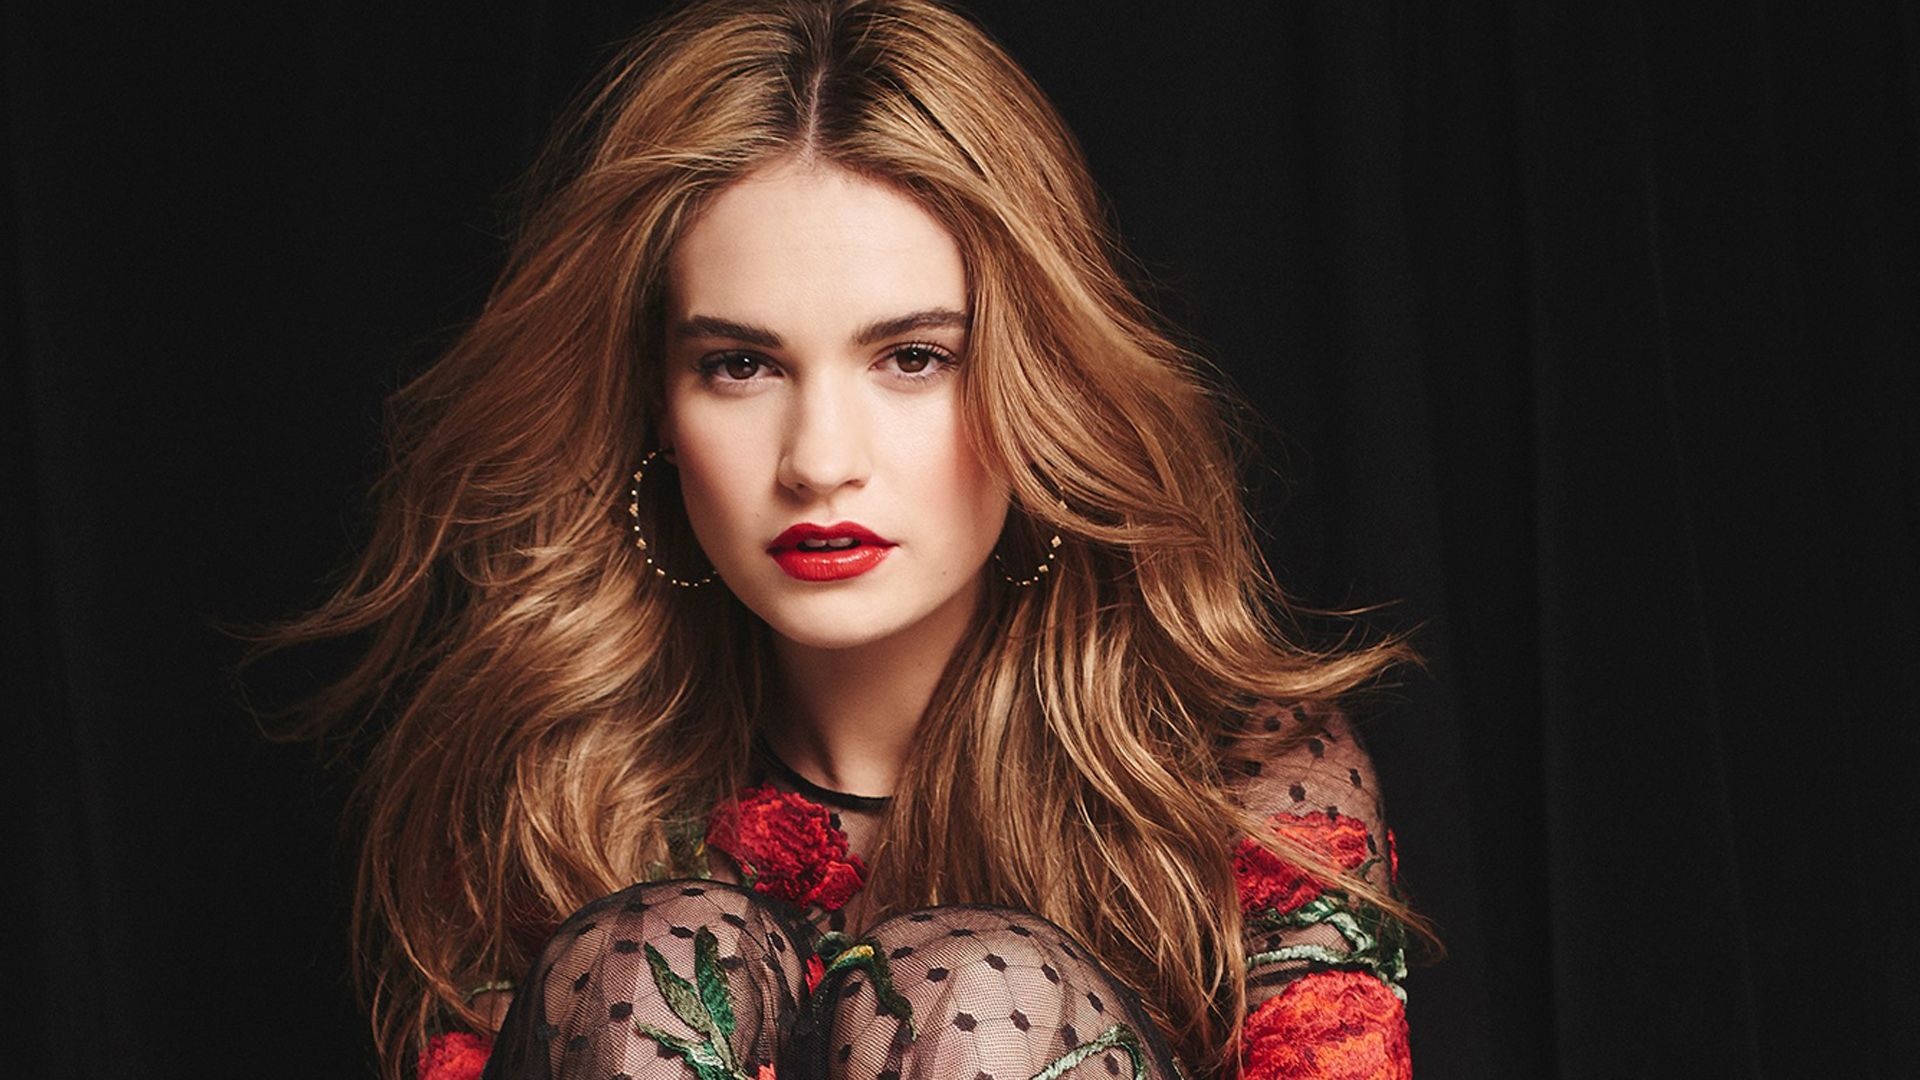 Lily James hot, Beautiful images, Sexy wallpapers, 1920x1080 Full HD Desktop